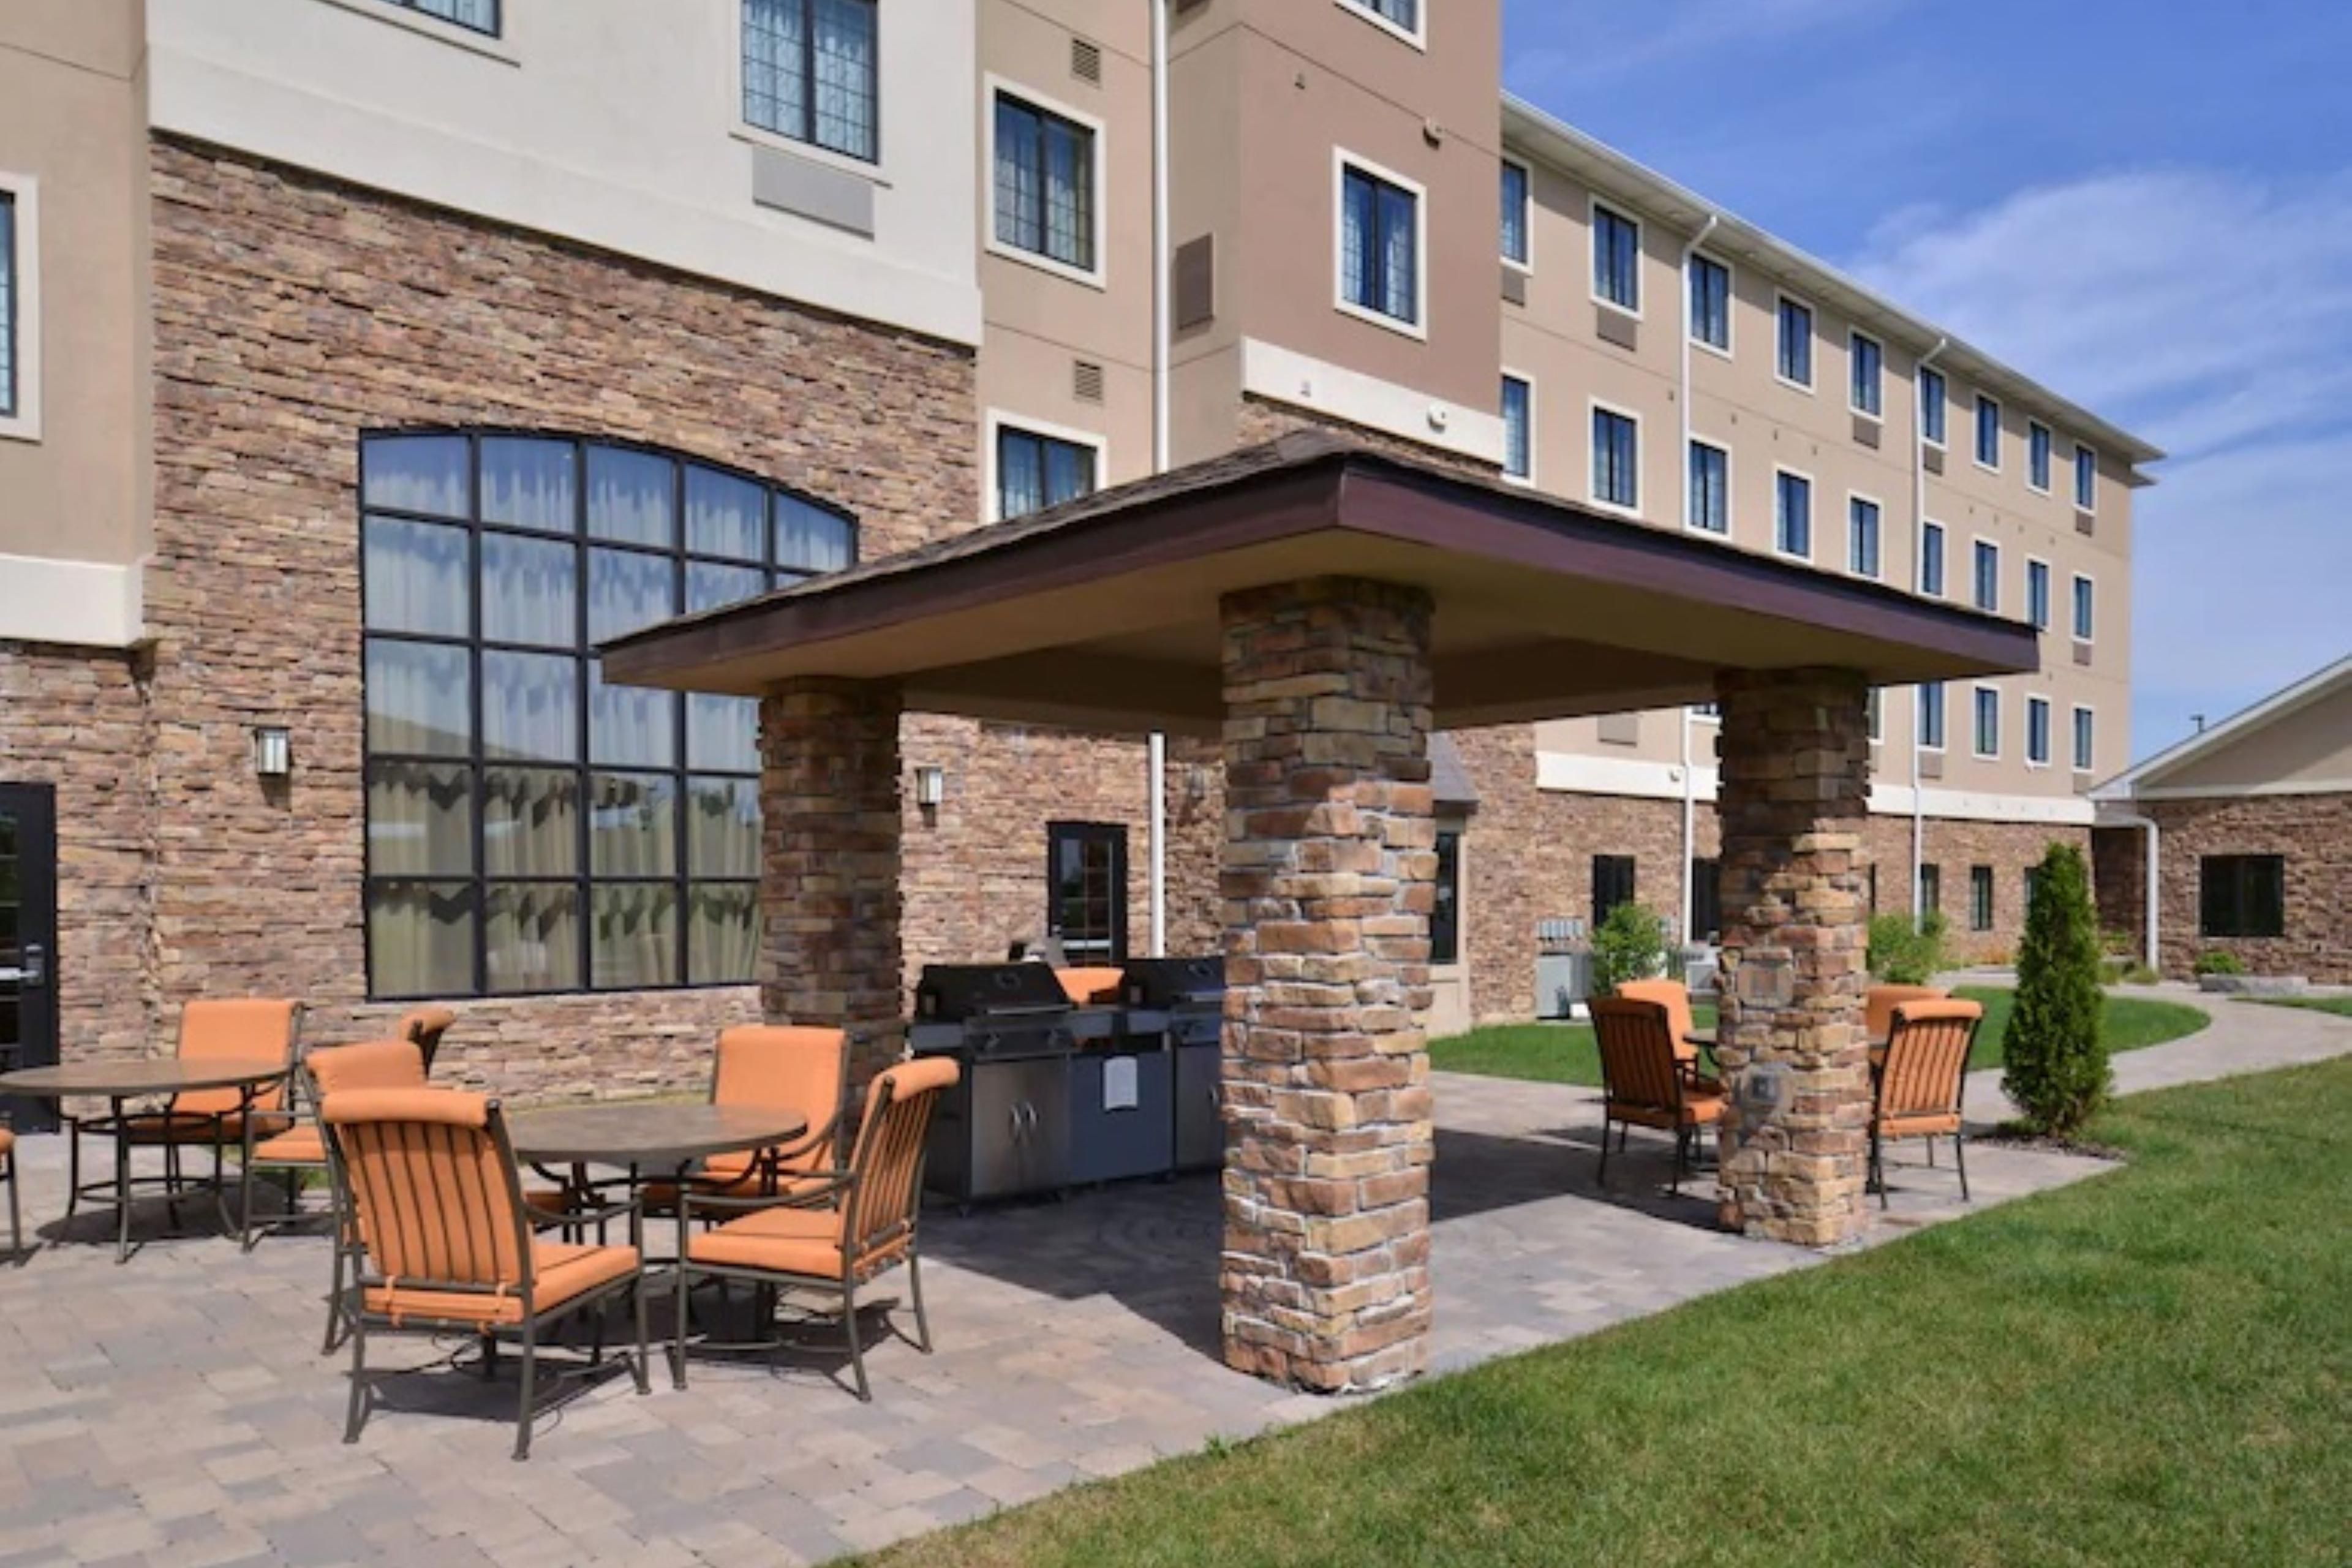 Come enjoy the outdoor courtyard with 2 barbecue grills or sit around our wonderful gas firepit.